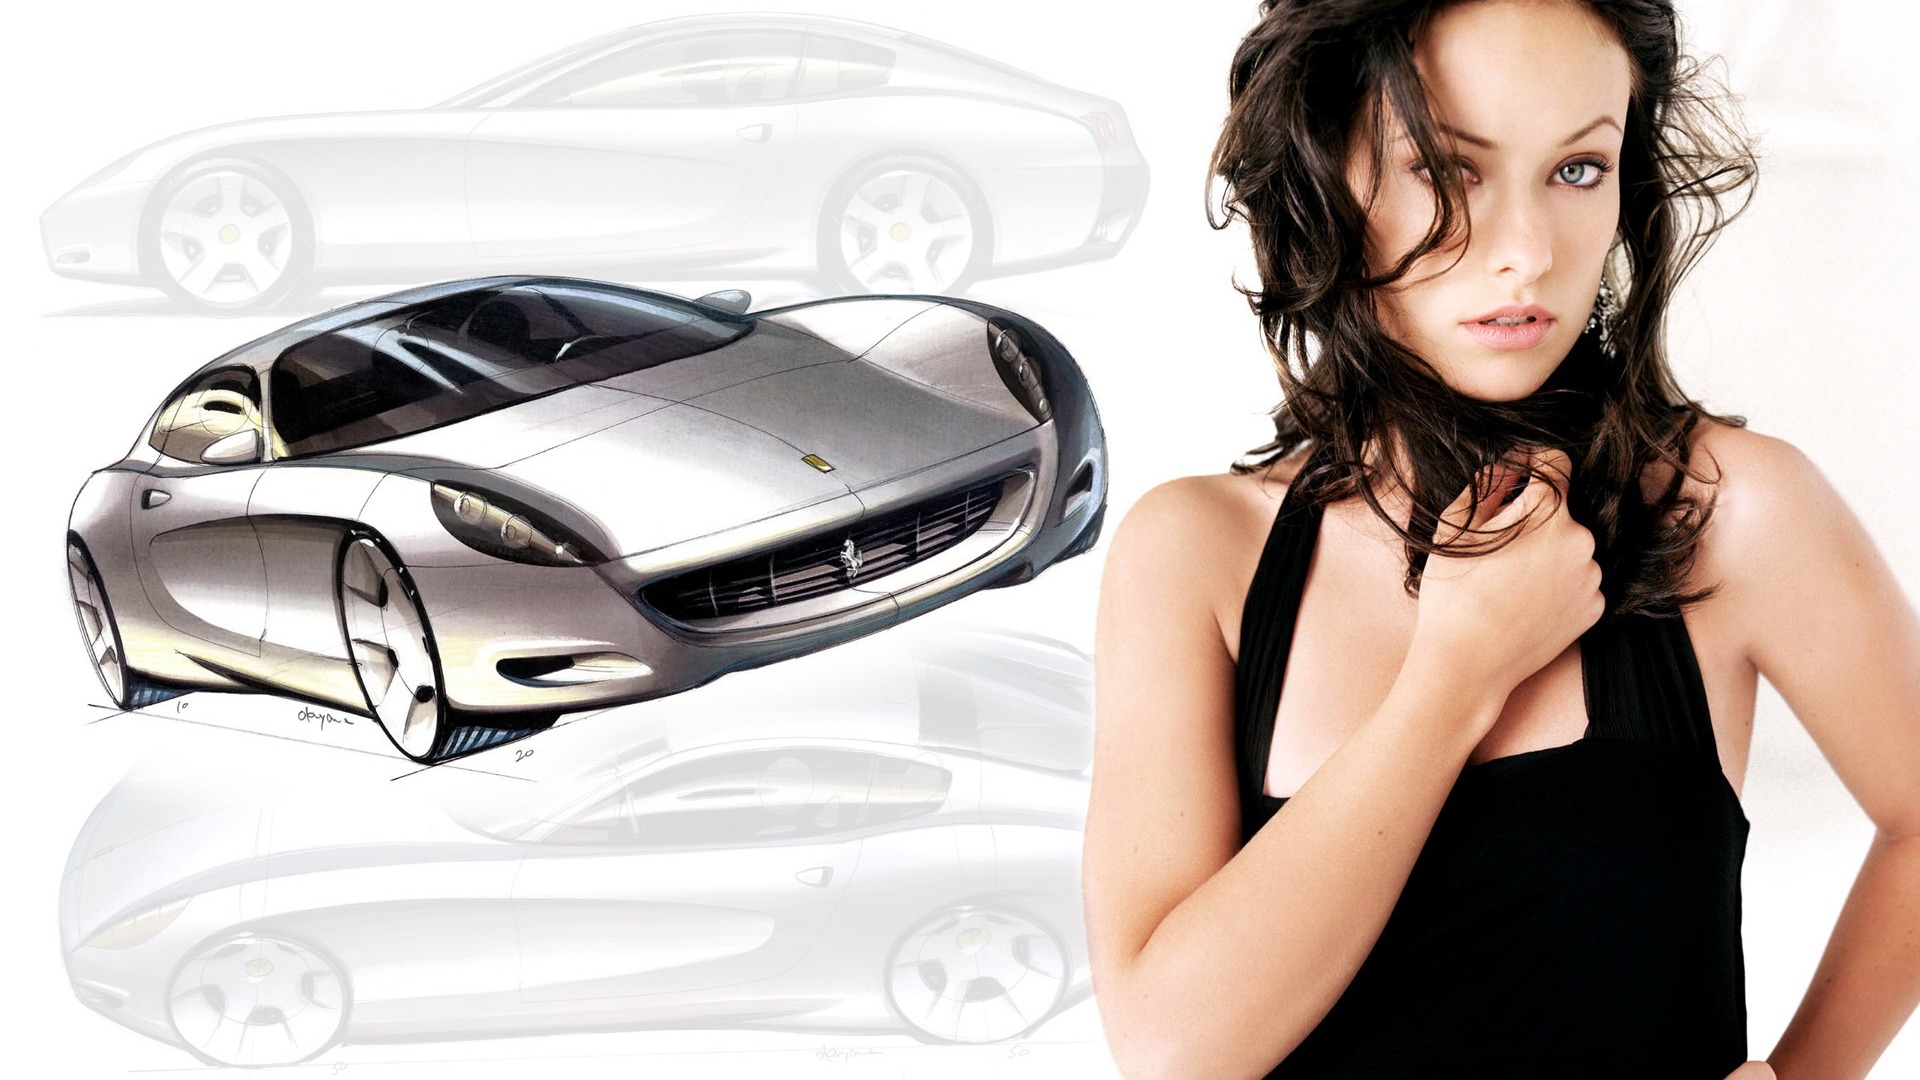 Cars and Girls wallpapers (2) #15 - 1920x1080